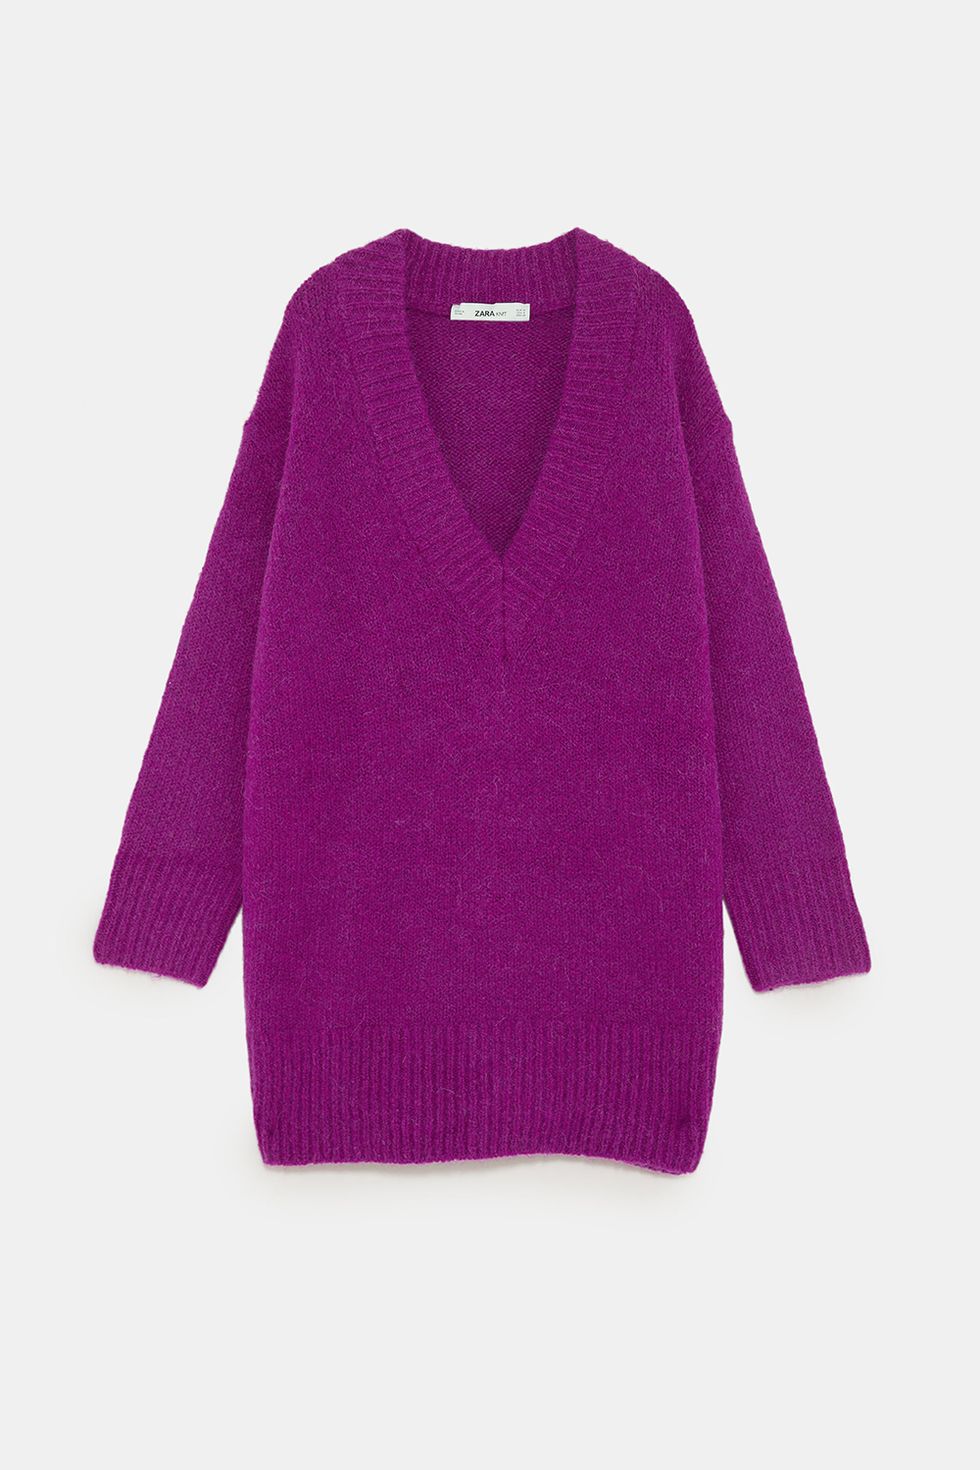 Clothing, Violet, Purple, Sleeve, Outerwear, Woolen, Wool, Sweater, Lilac, Magenta, 